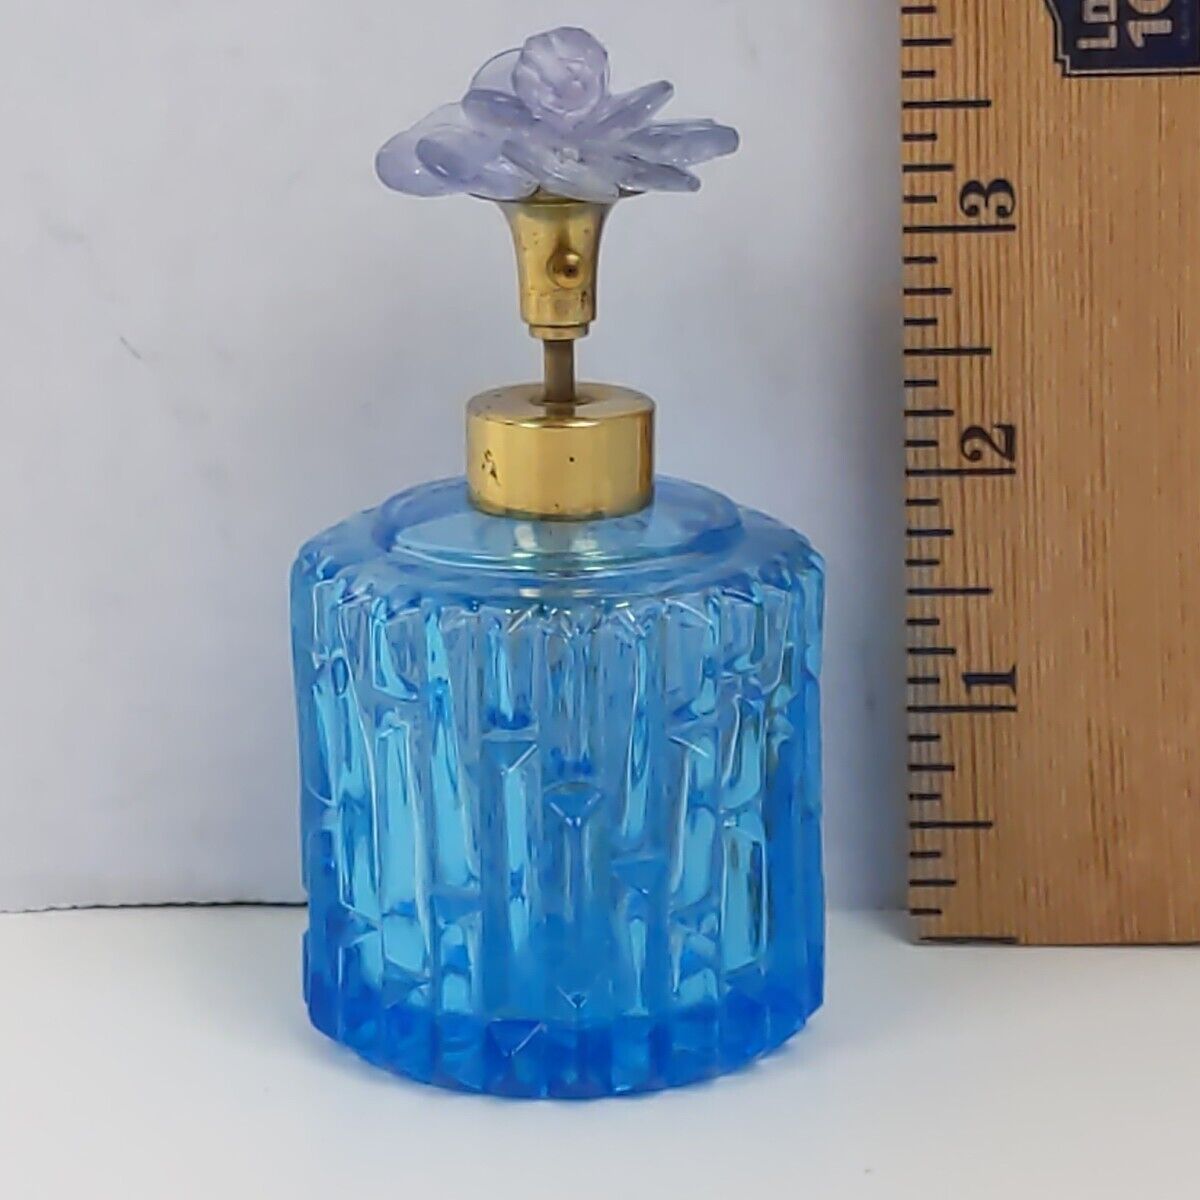 IW Rice Blue Glass Perfume Bottle Beads Floral Vintage Spray Bottle